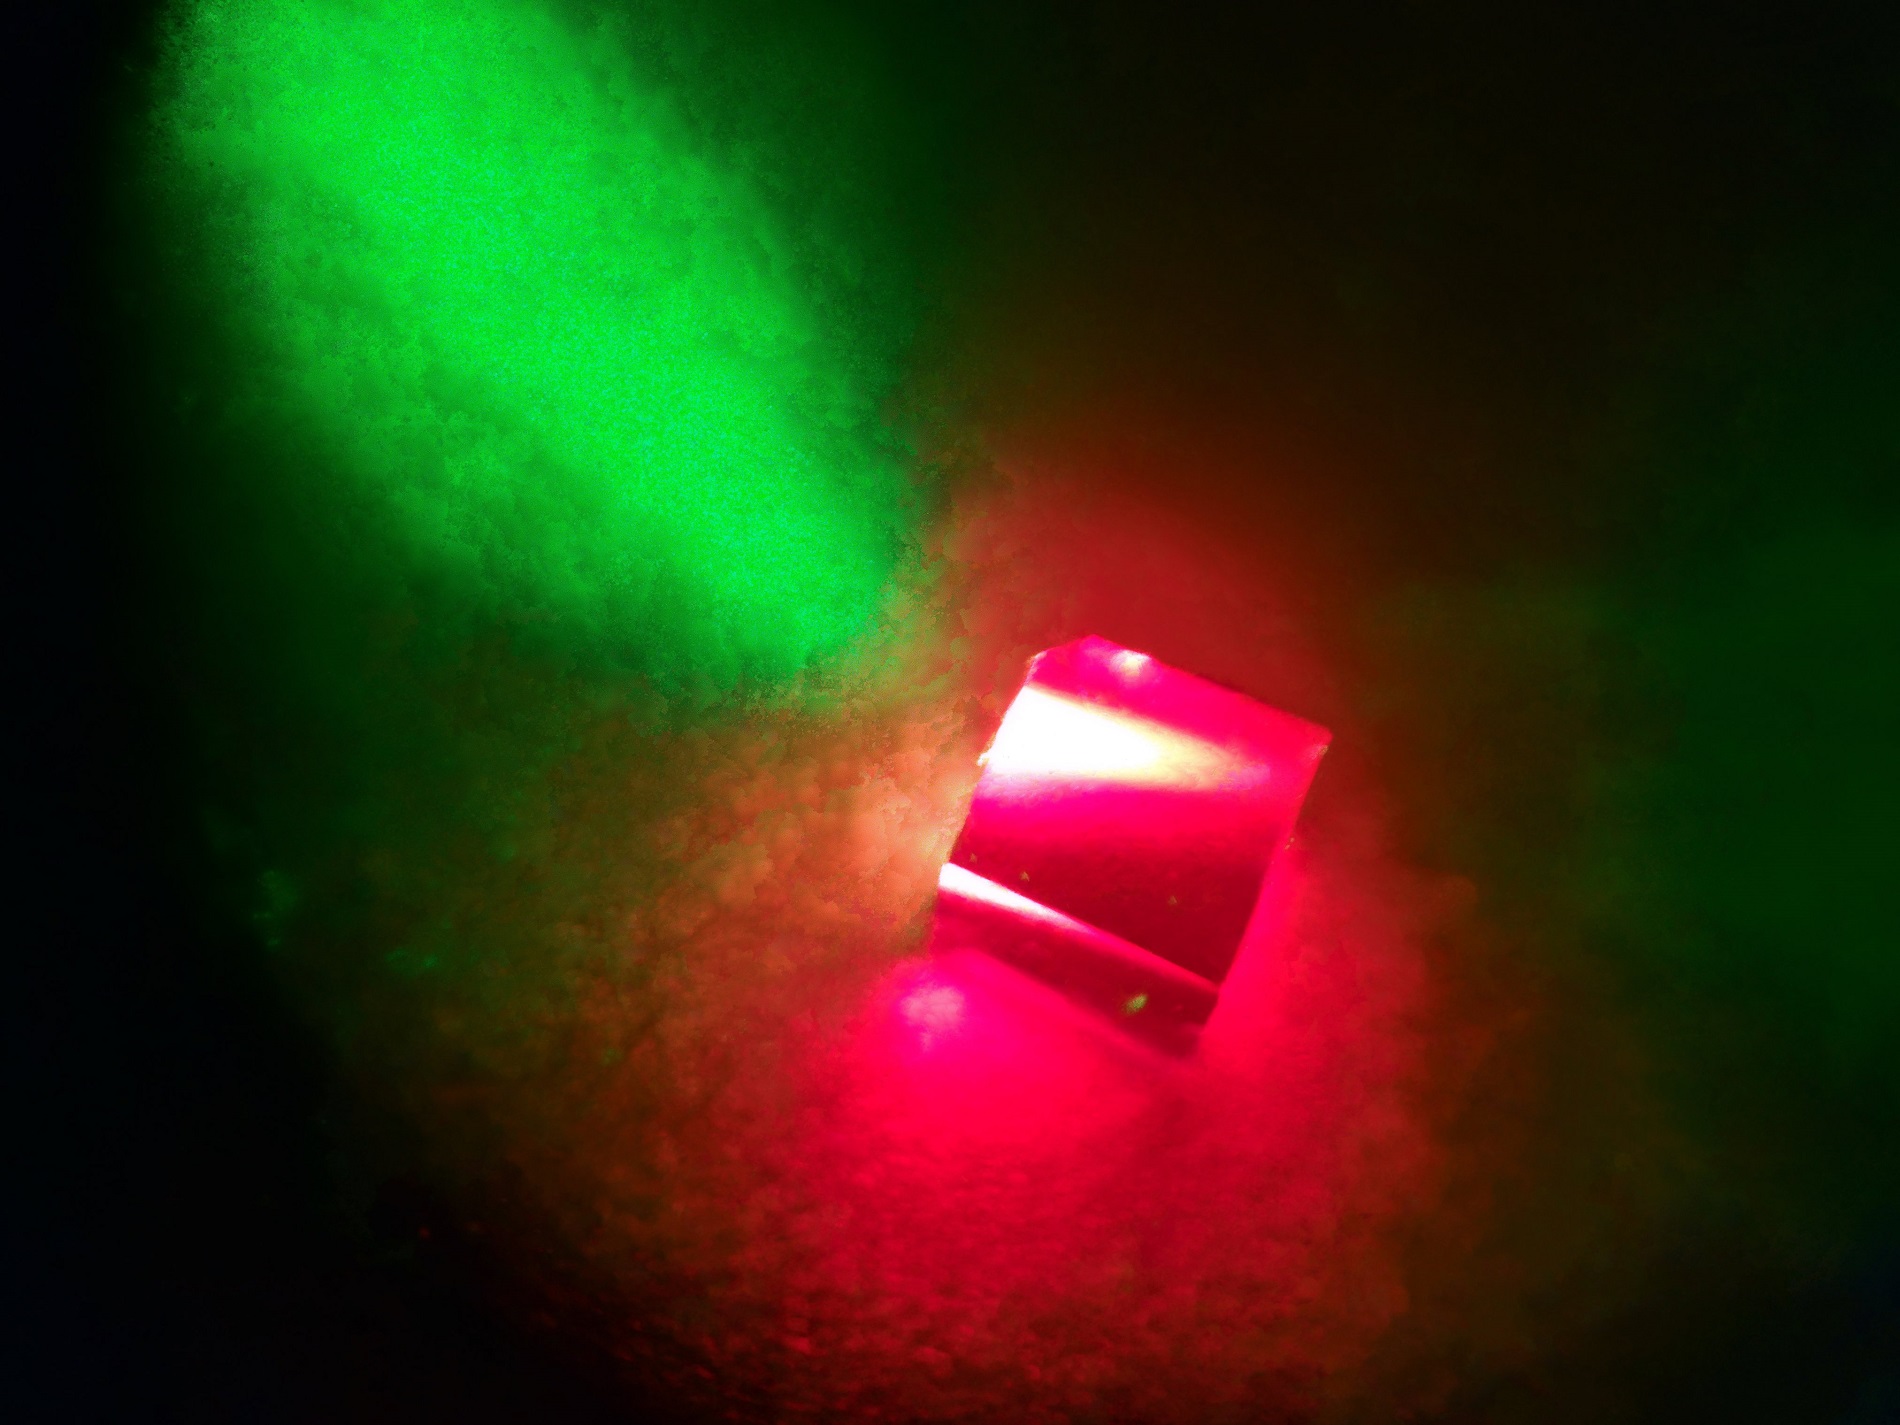 A diamond containing nitrogen-vacancy defects centres is illuminated by a 532-nm green laser